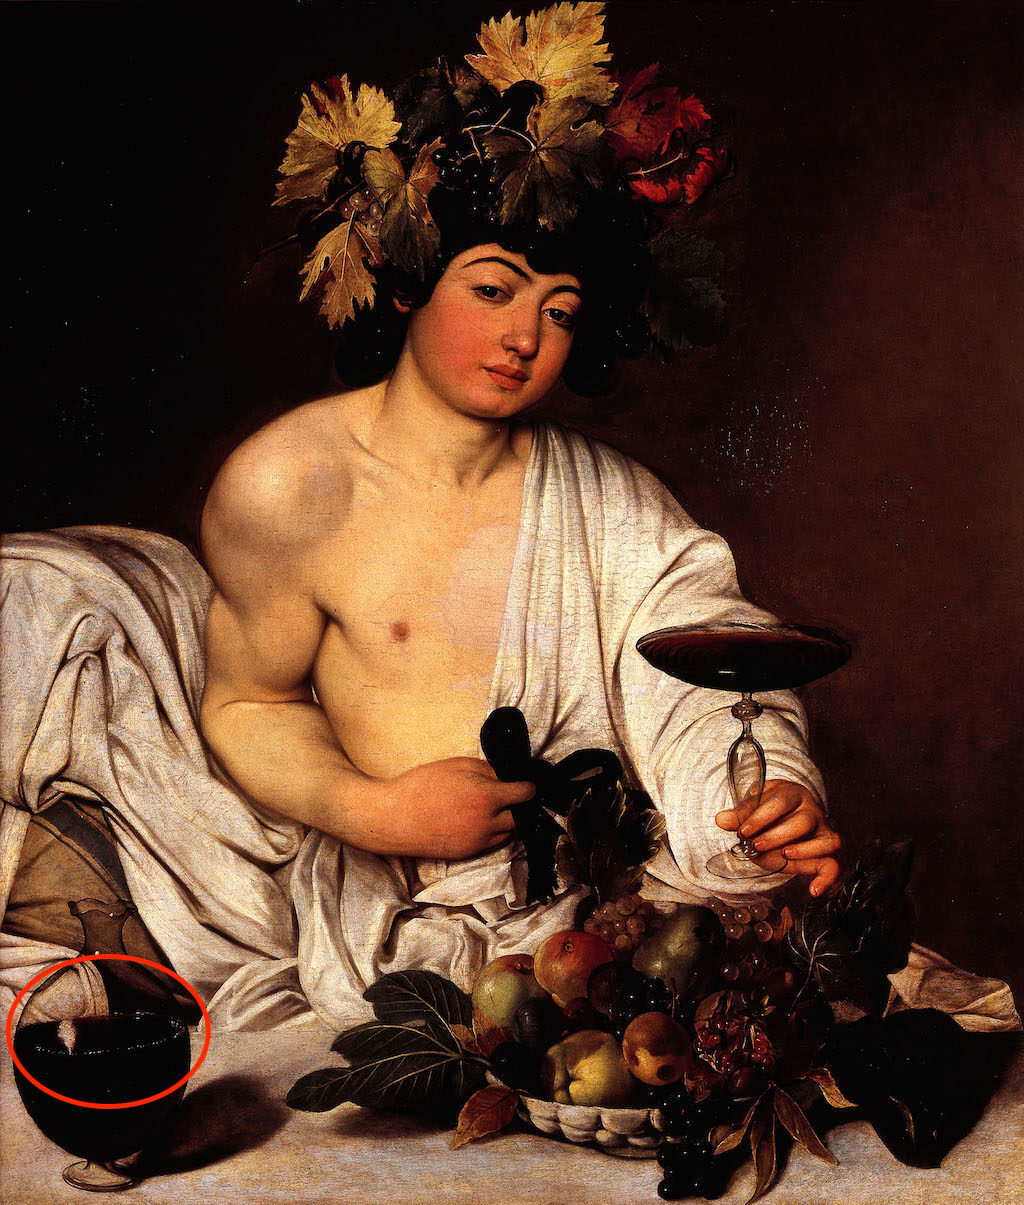 DNGT82 Caravaggio, The adolescent Bacchus 1595-1597 Oil on canvas. Uffizi Gallery, Florence, Italy.